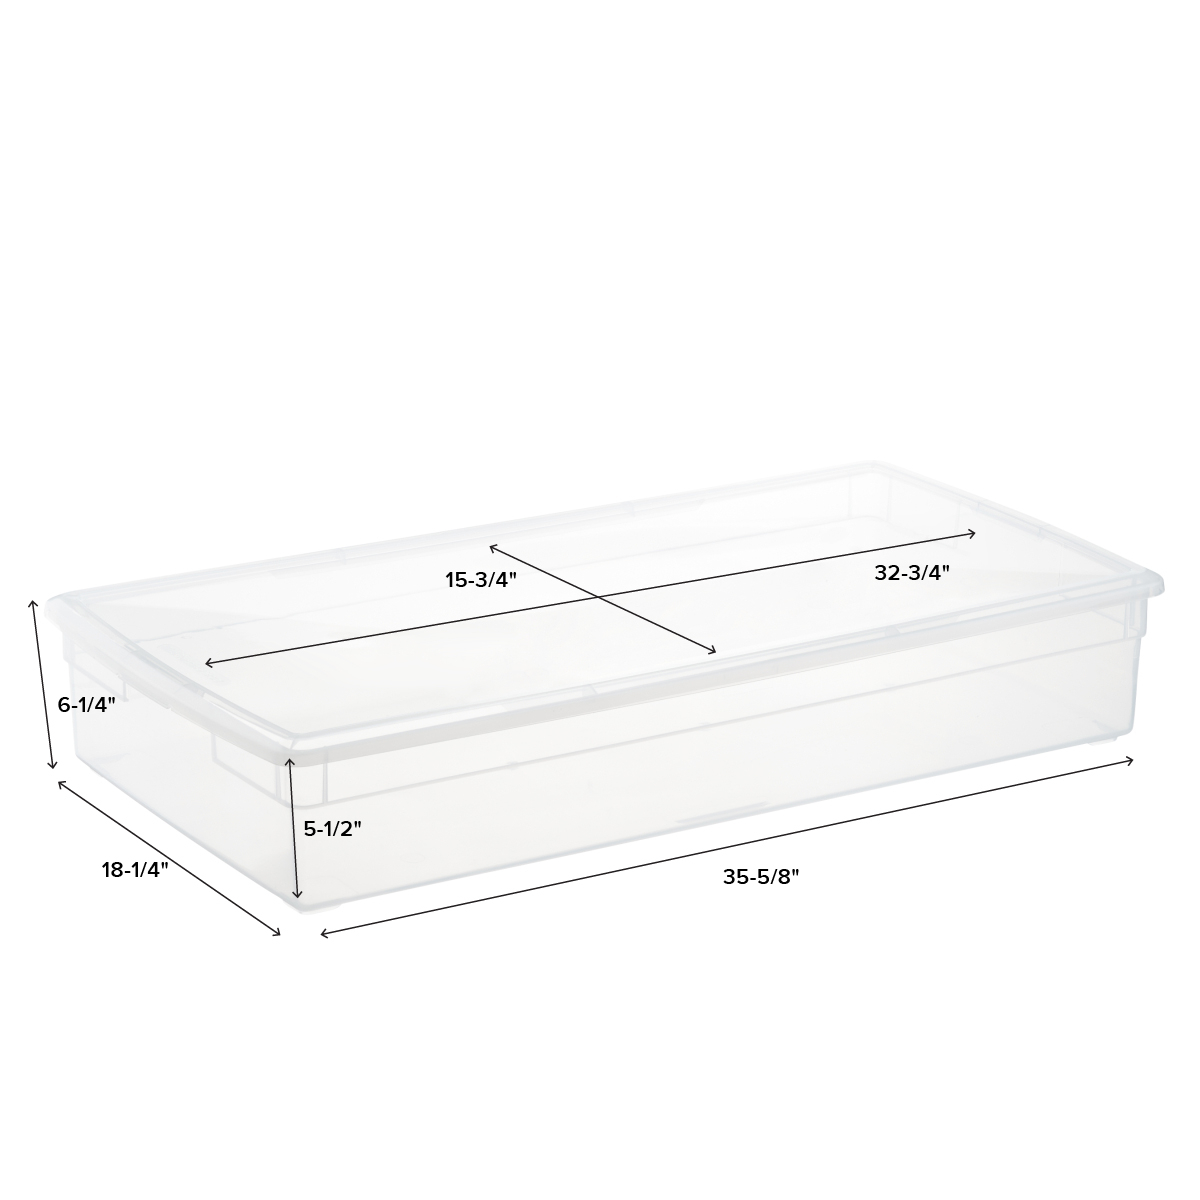 FREE Shipping Extra-Thick 5-1/4 x 6-1/4” x 1-3/8" Display Case 1 Only 